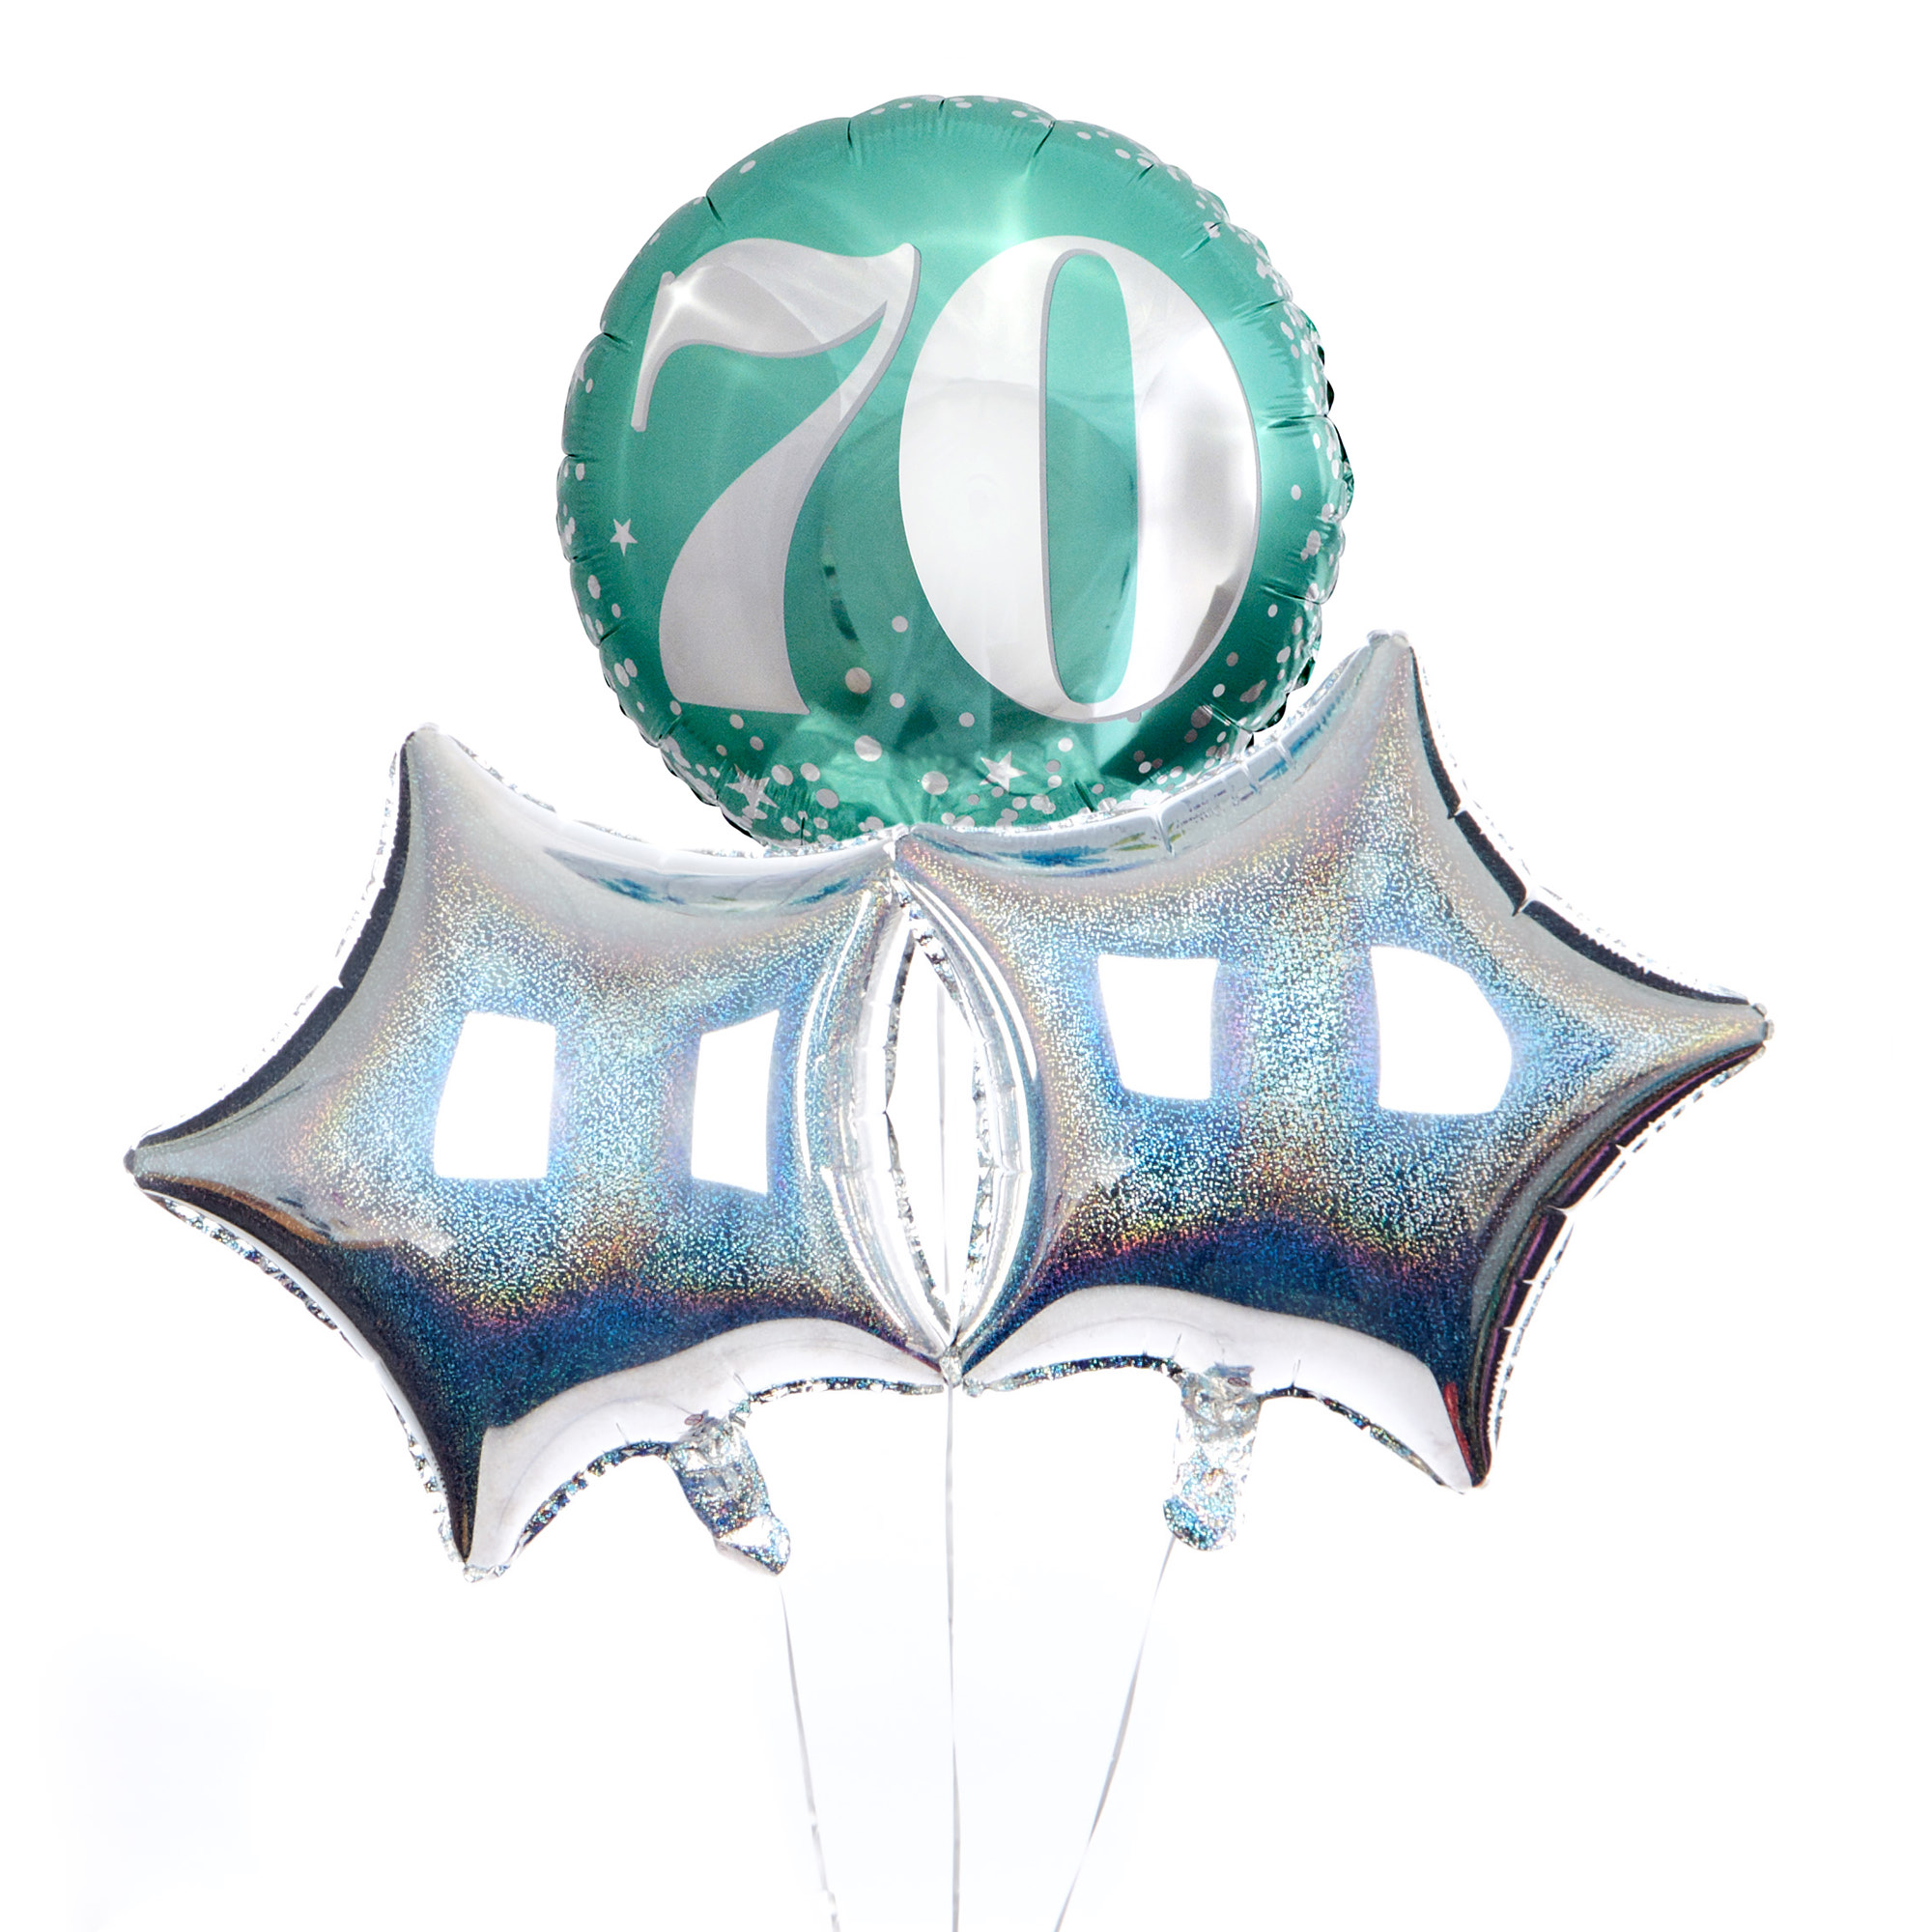 Mint Green & Silver 70th Birthday Balloon Bouquet - DELIVERED INFLATED!